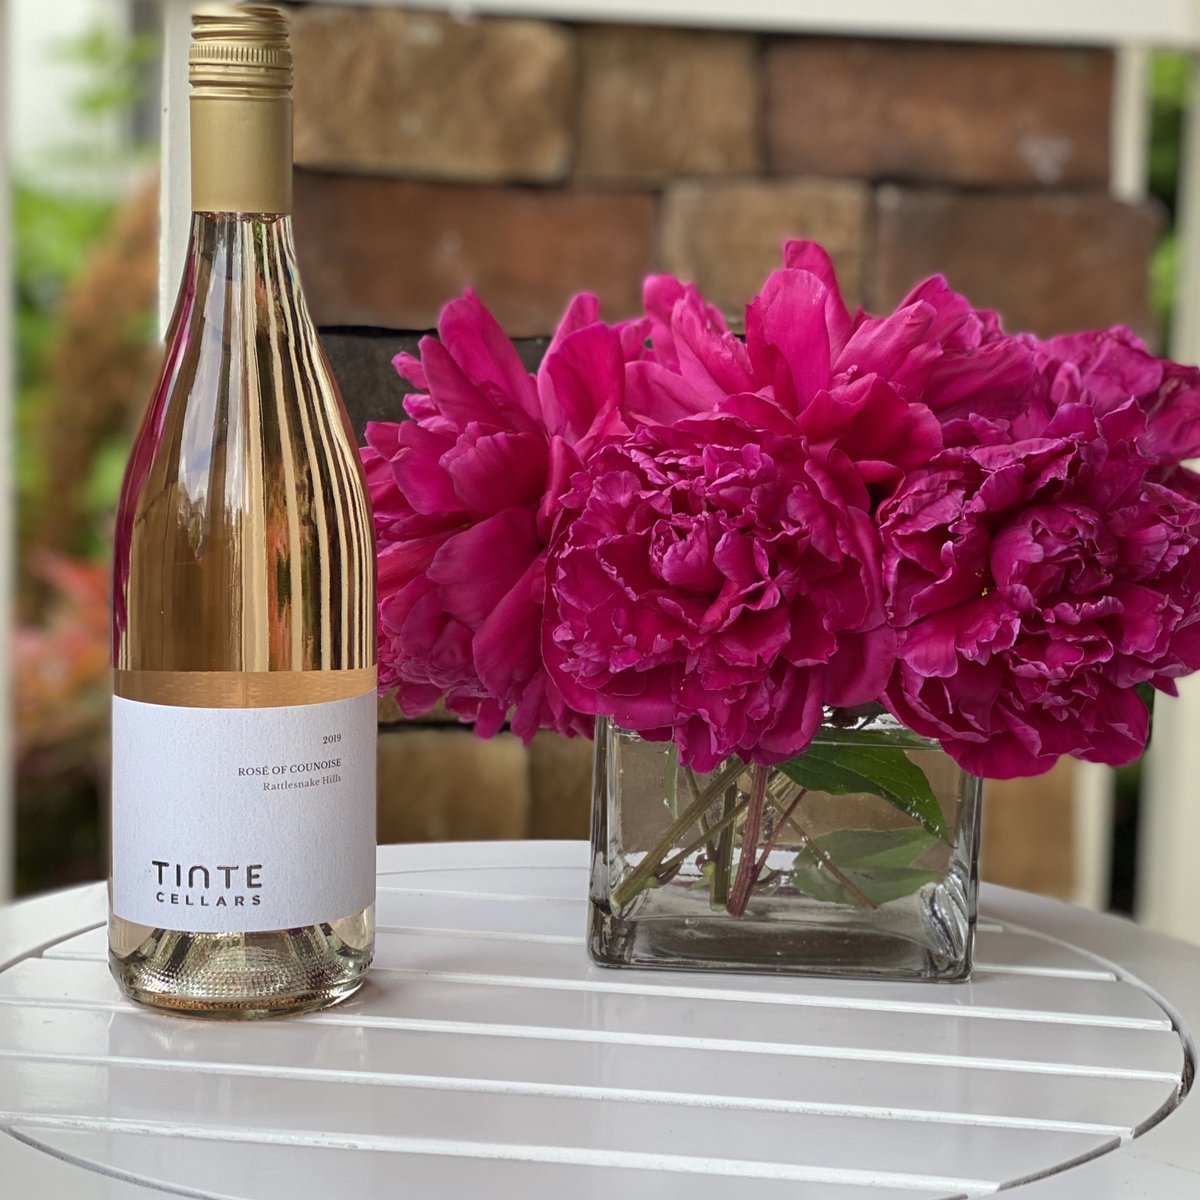 Get this Rosé of Counoise on June 5th @TinteCellars! Their first rosé and it’s delicious! Thanks to Tinte for giving us the bottle to try. We love it! #winewednesday #rosé #roséallday #woodinvillewinecountry #newepicenter #wine